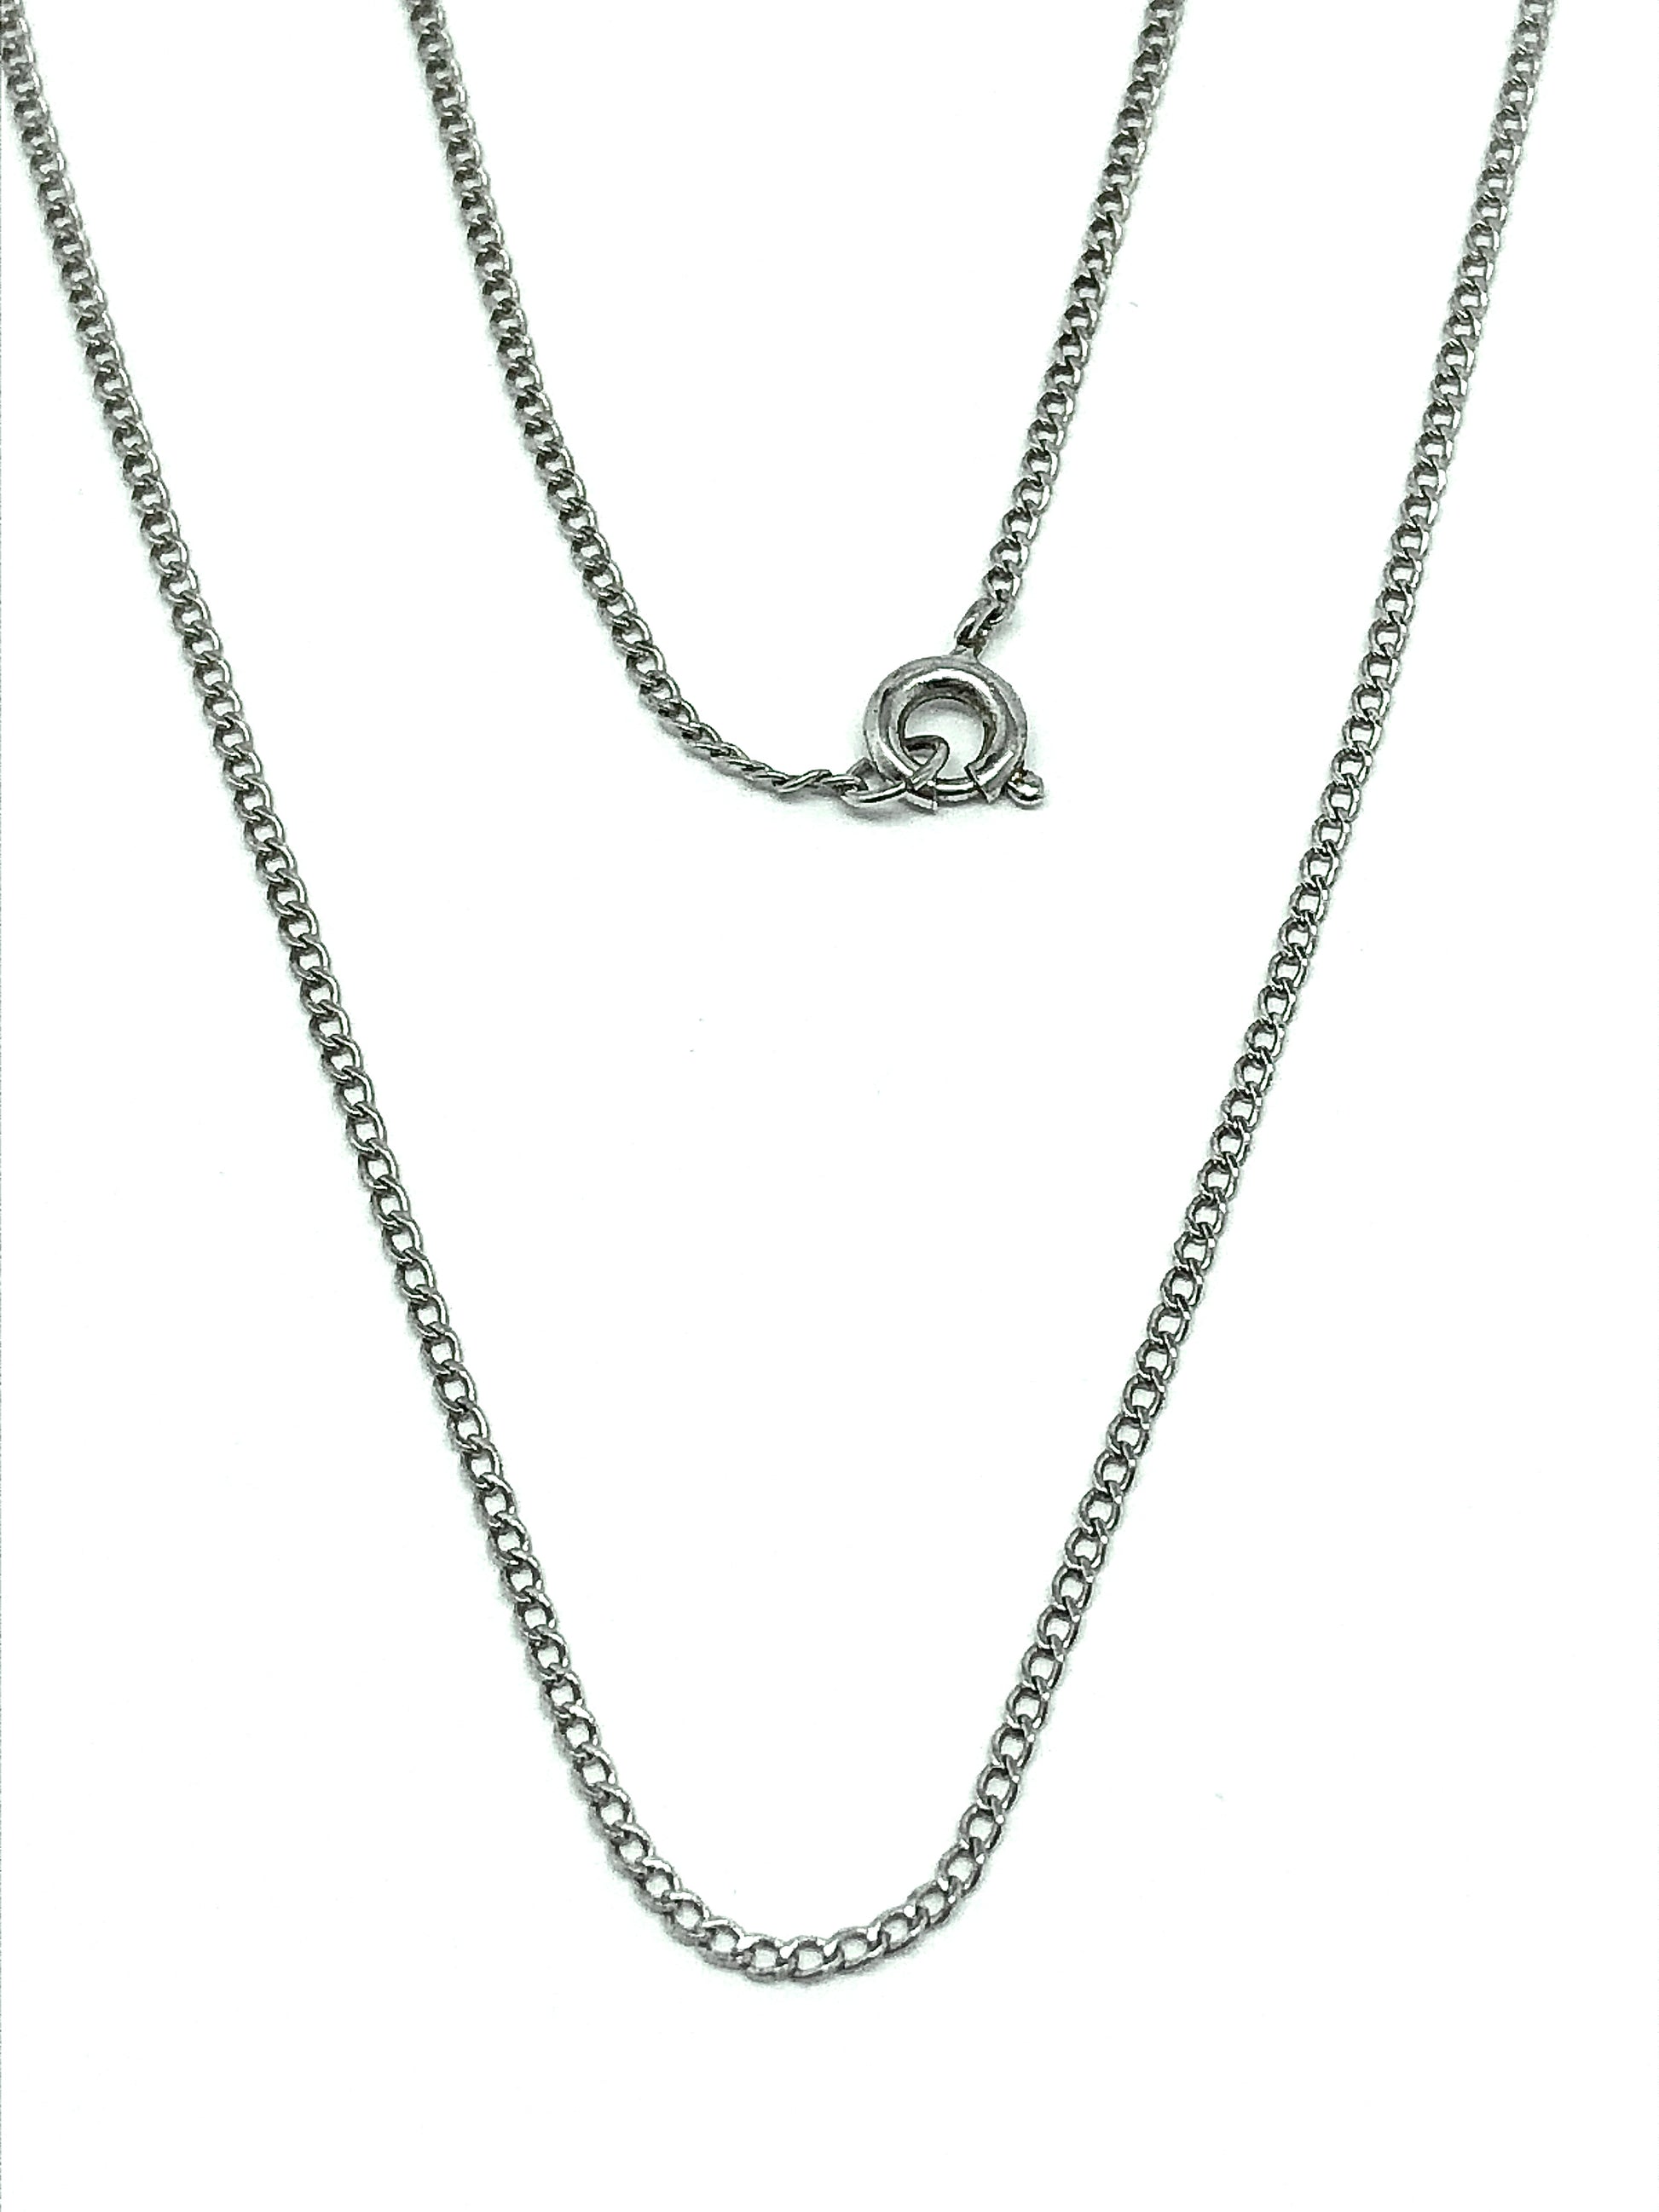 Blingschlingers - Quality Jewelry | Vintage 1960s Solid Sterling Silver Feminine Fine Curb Chain Necklace